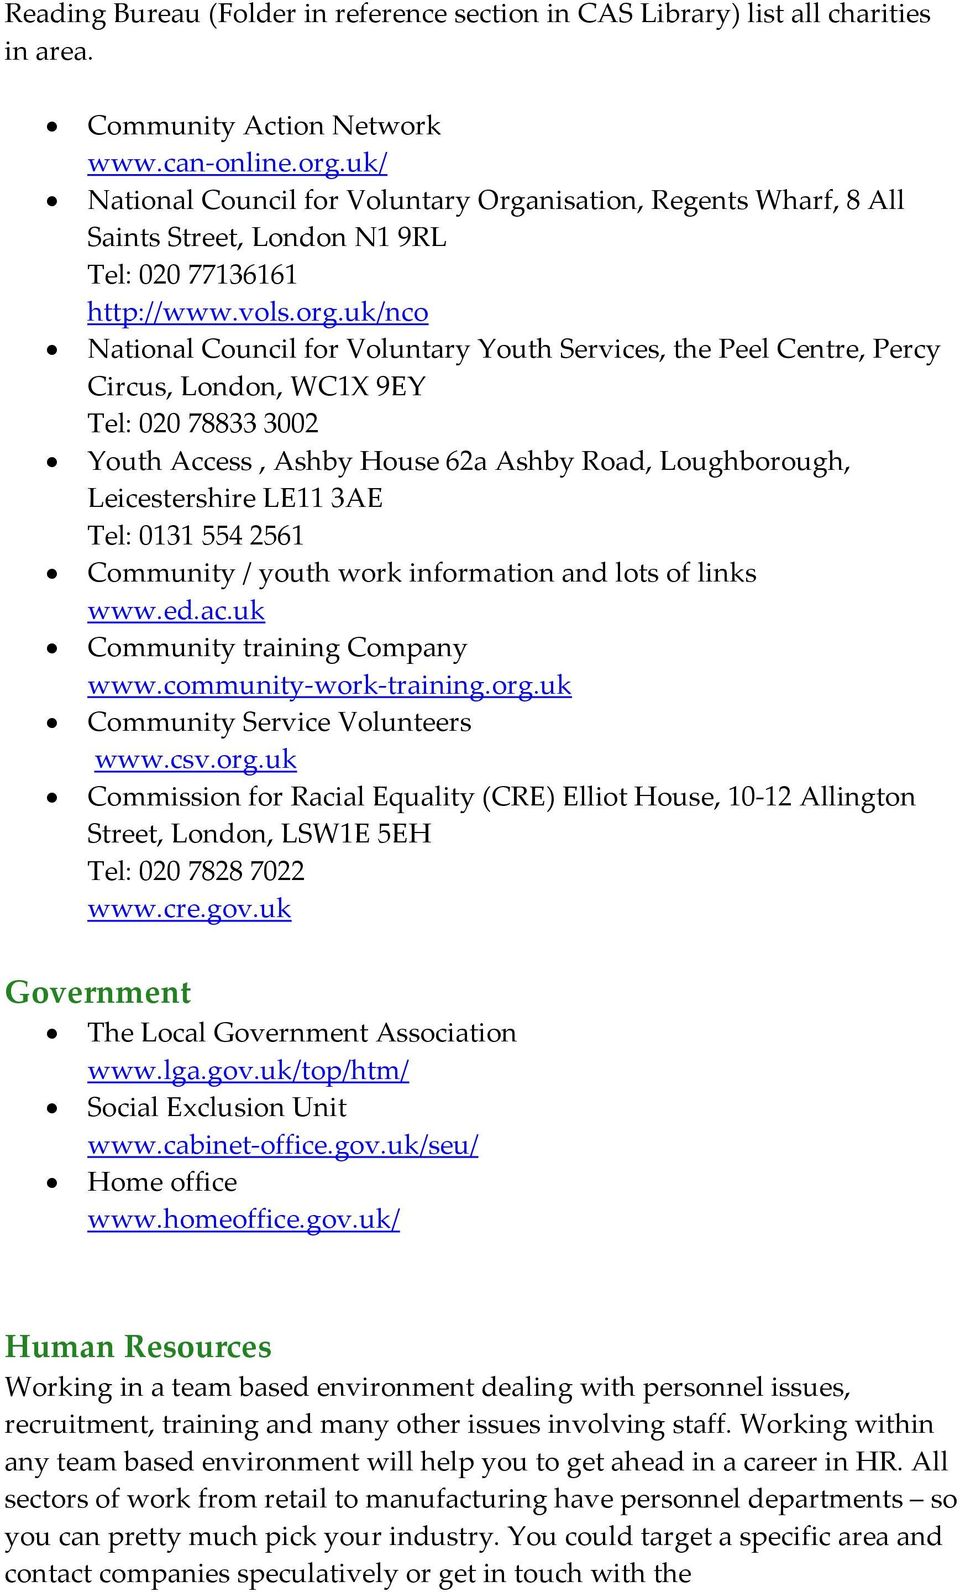 uk/nco National Council for Voluntary Youth Services, the Peel Centre, Percy Circus, London, WC1X 9EY Tel: 020 78833 3002 Youth Access, Ashby House 62a Ashby Road, Loughborough, Leicestershire LE11